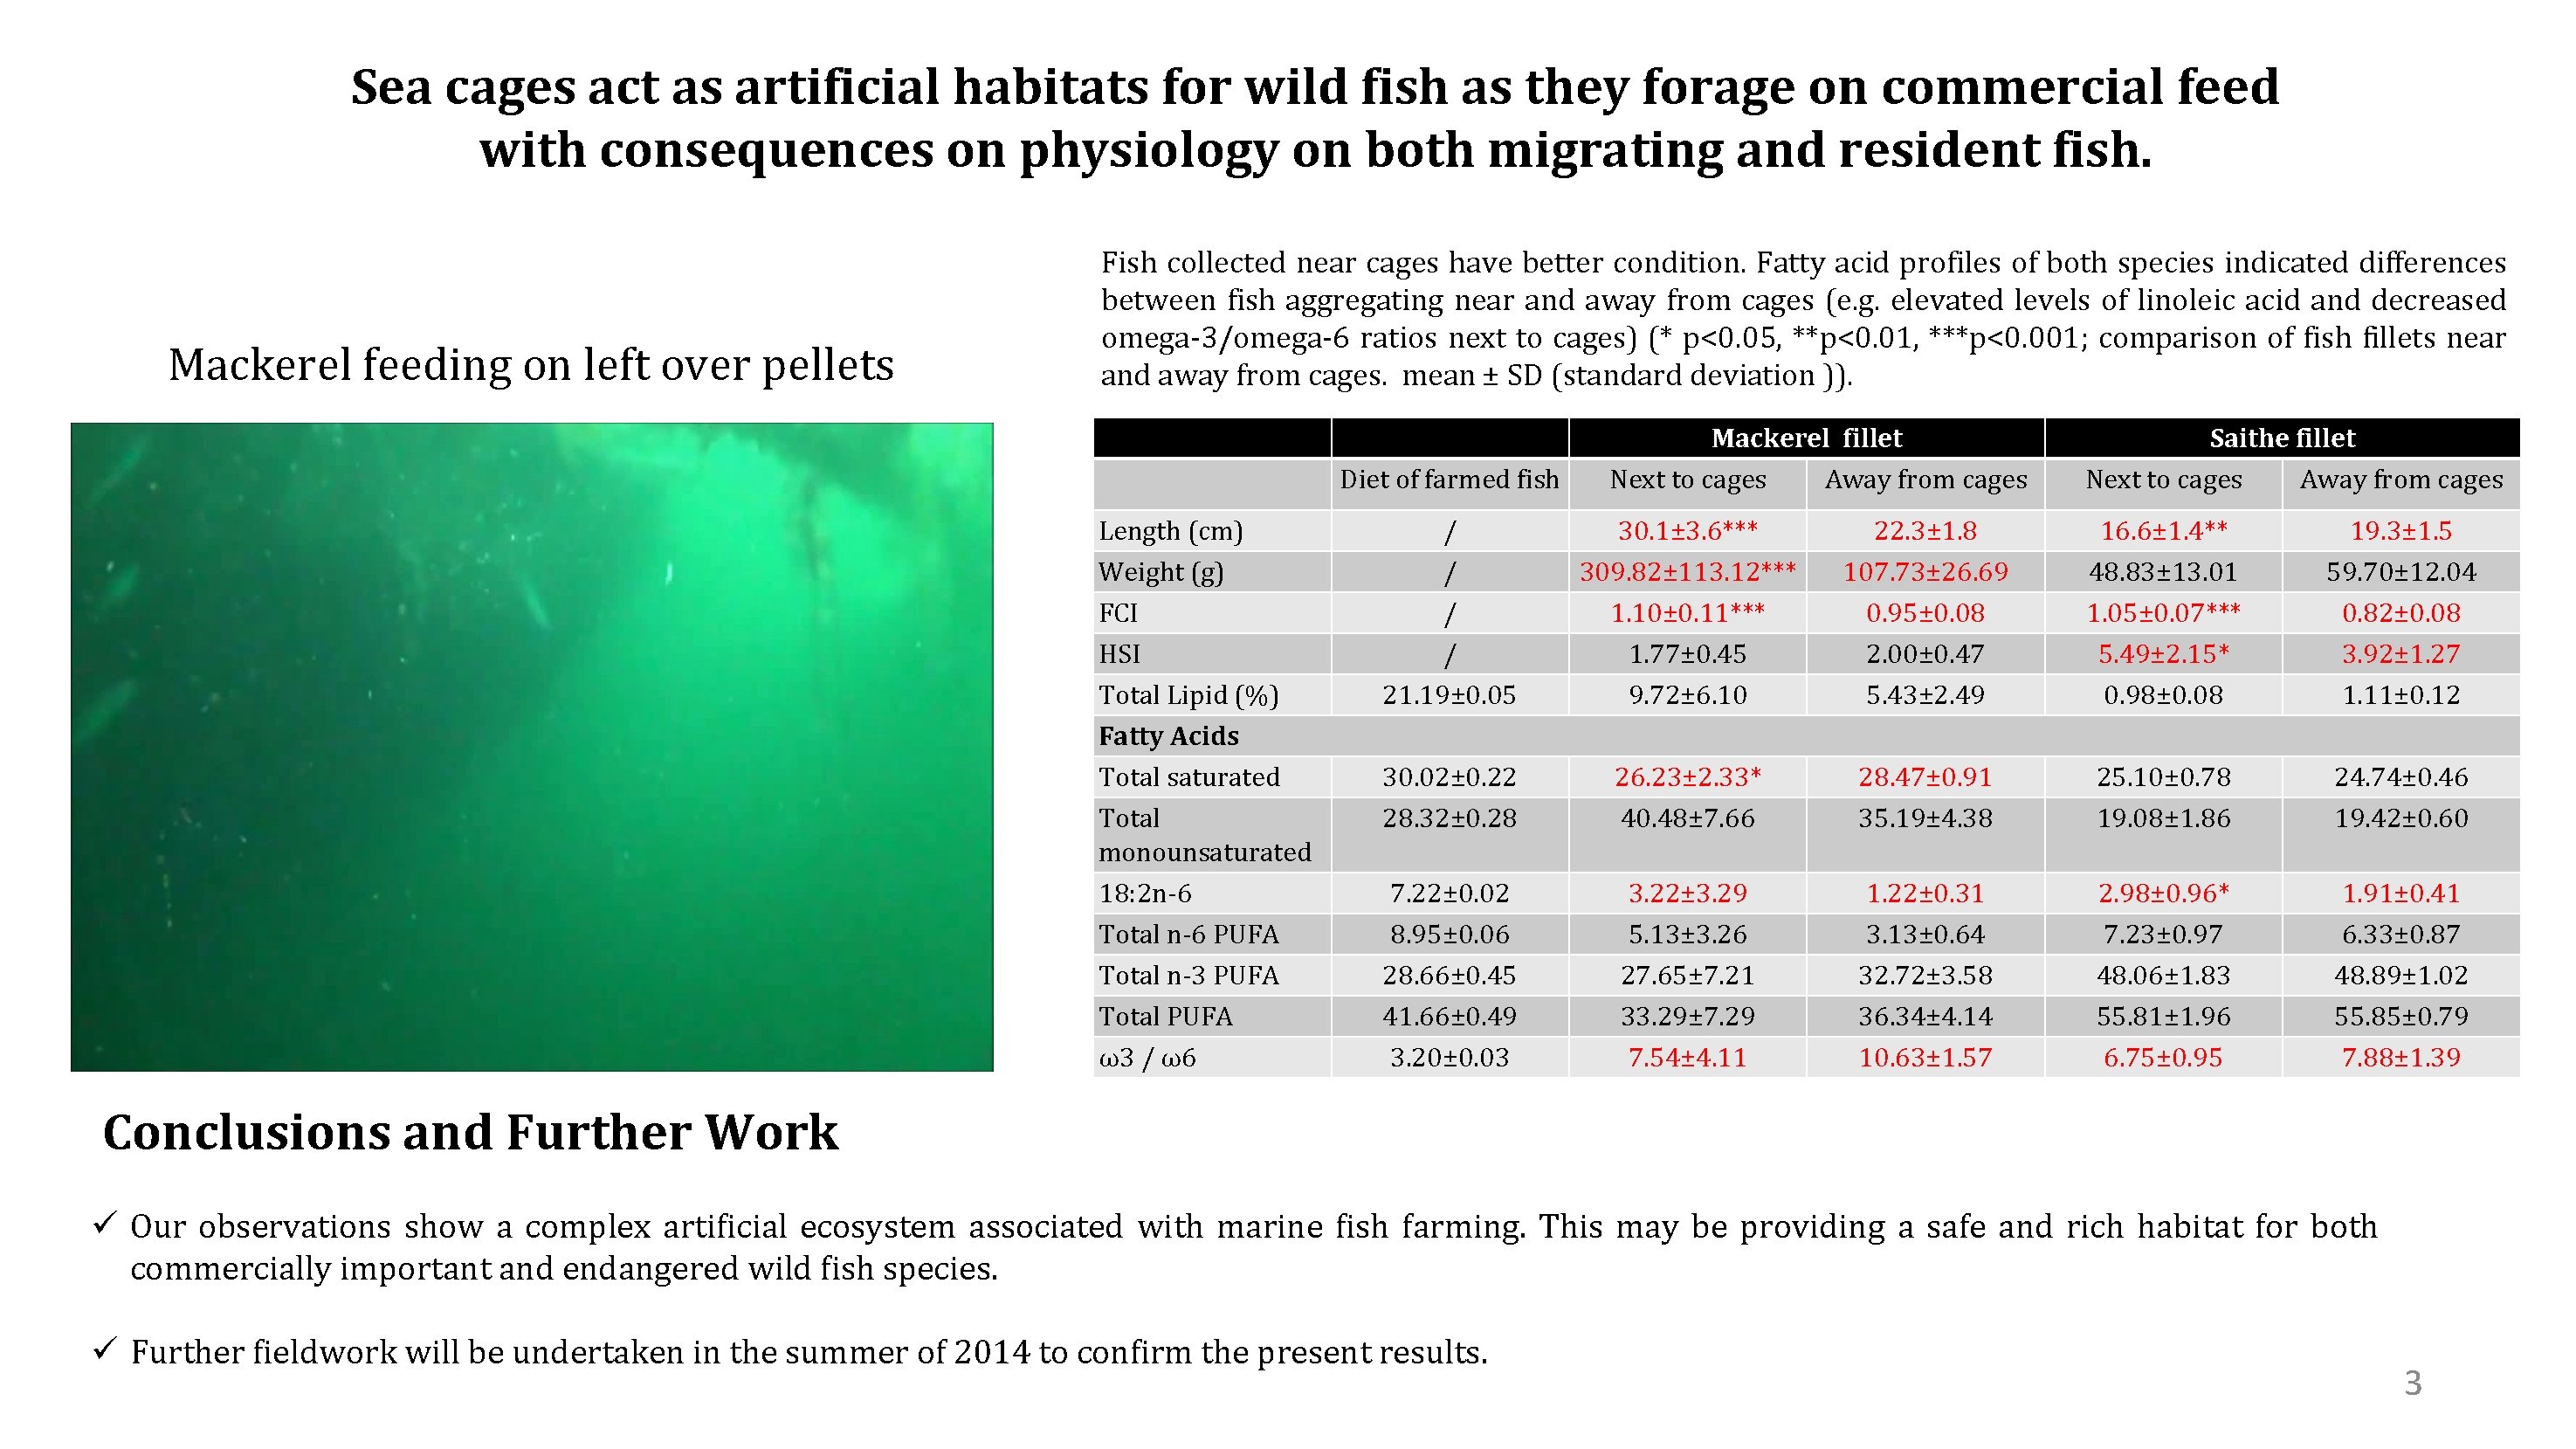 Sea cages act as artificial habitats for wild fish as they forage on commercial